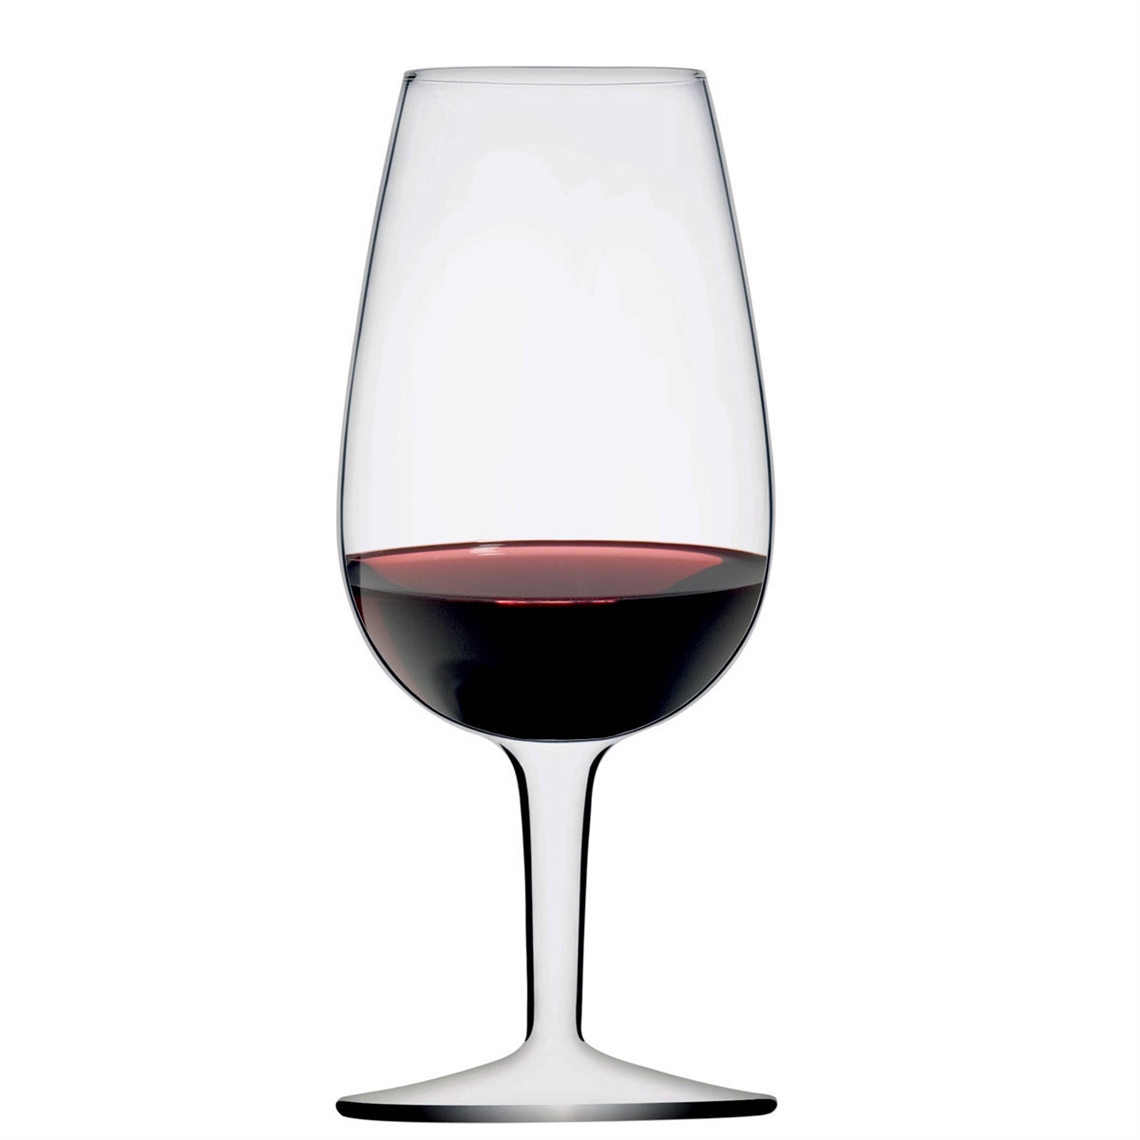 View more wine glasses from our Wine Tasting Glasses range